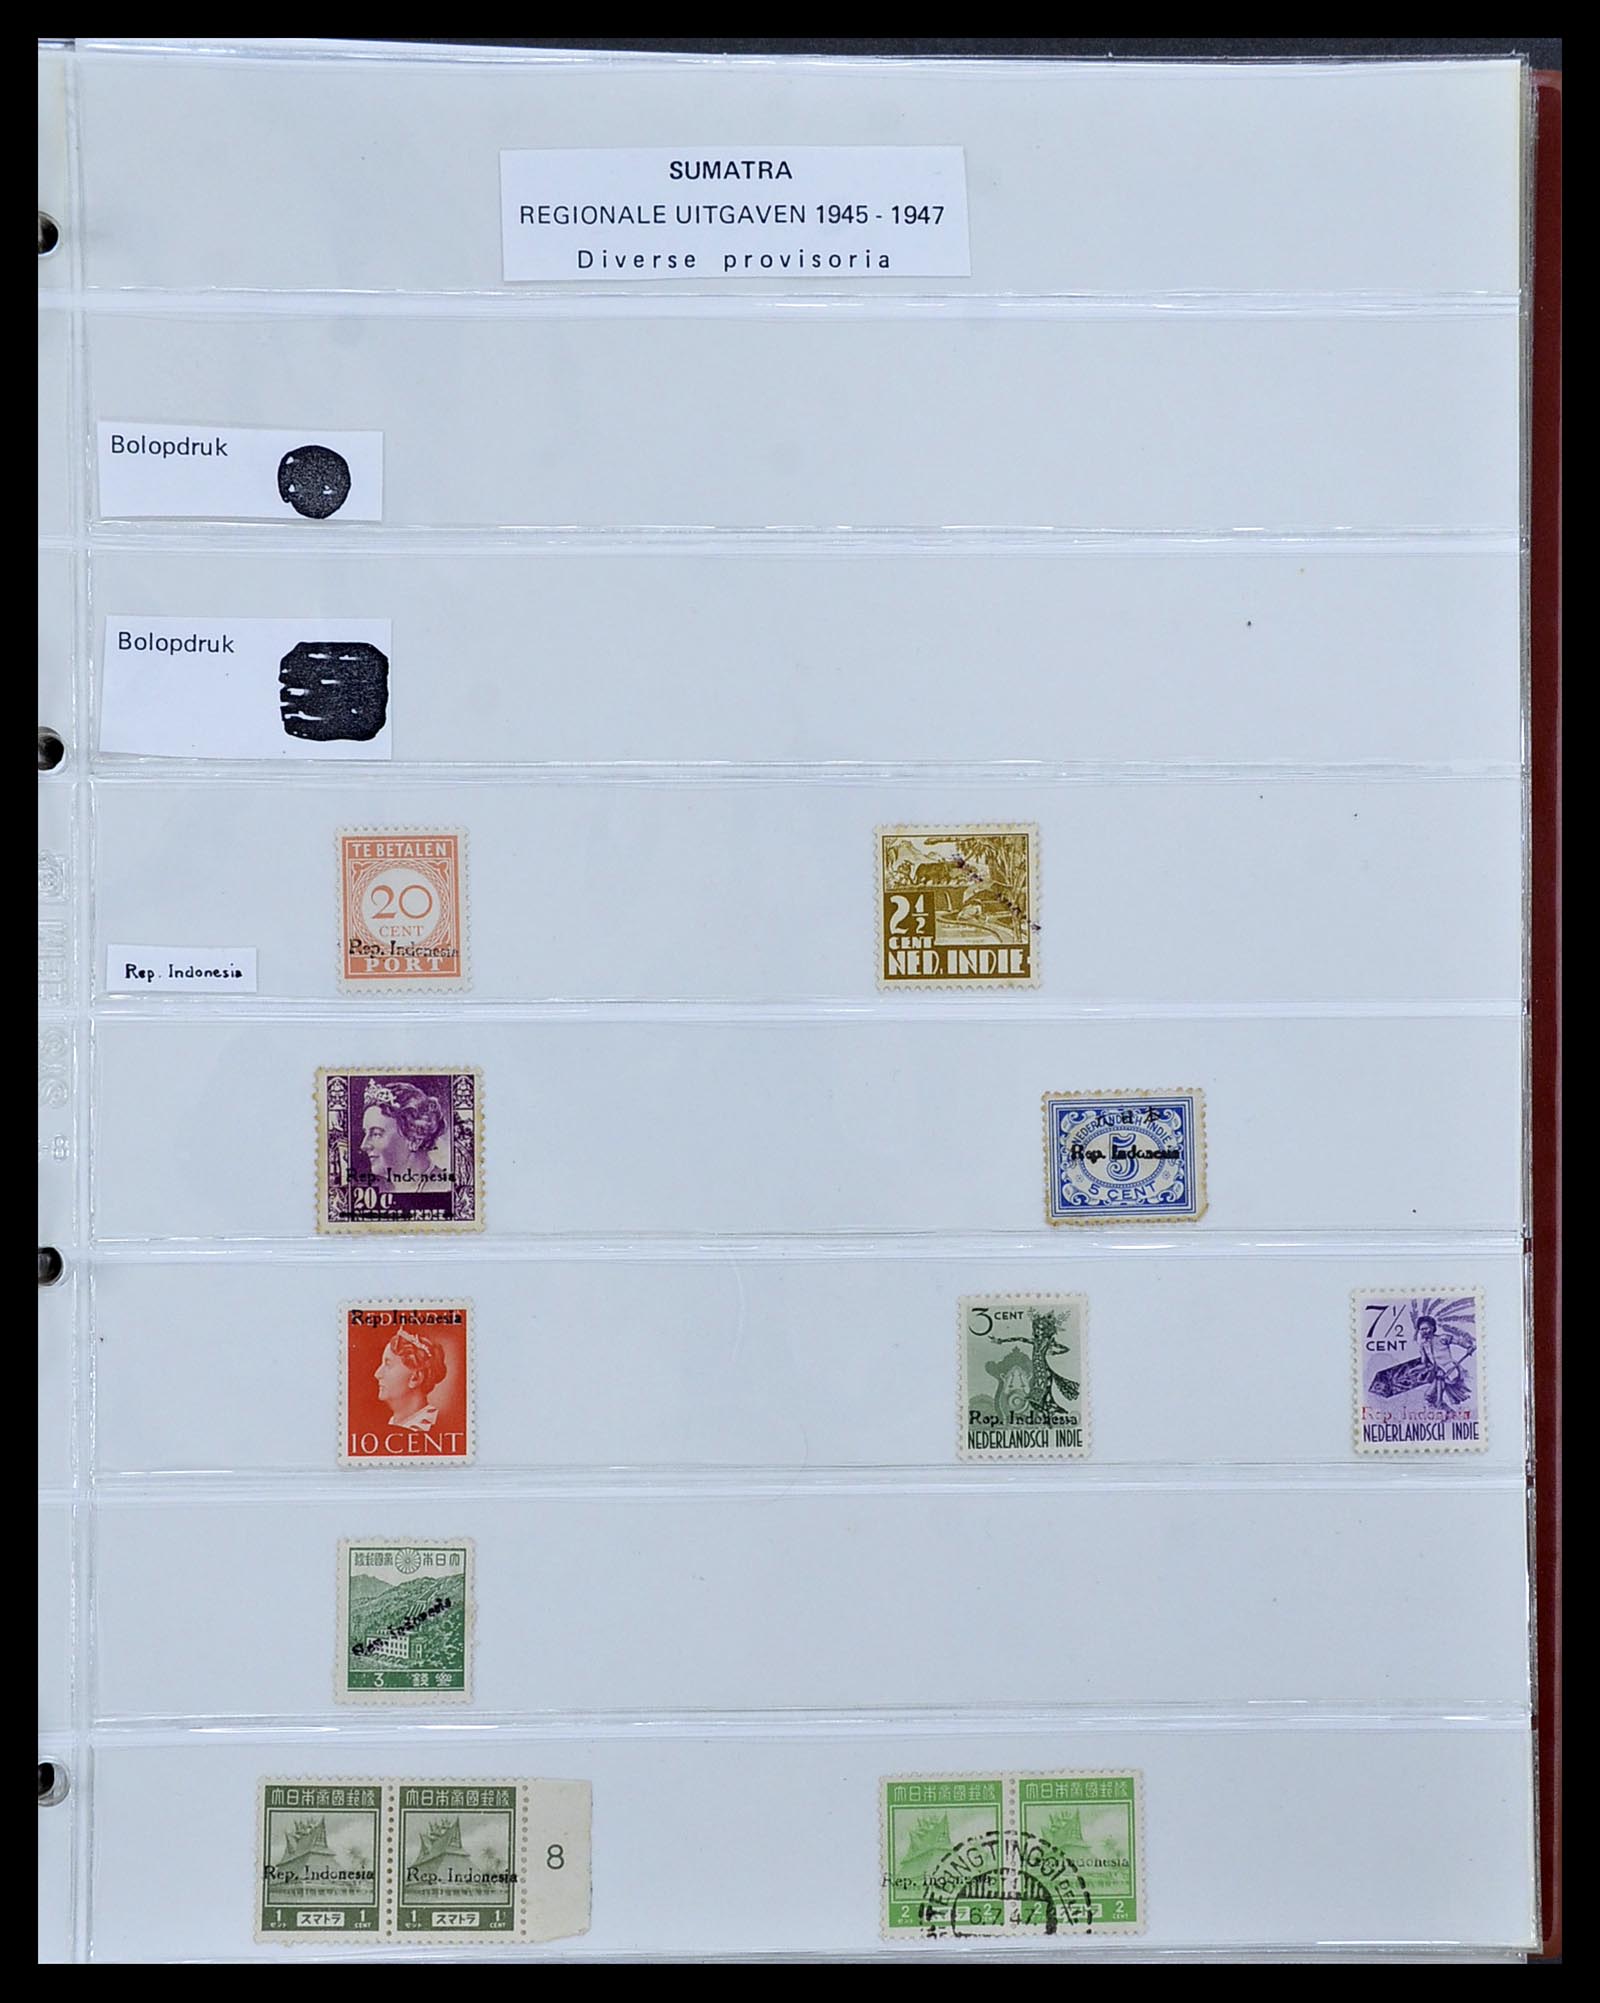 34545 072 - Stamp Collection 34545 Japanese Occupation of the Dutch East Indies and 